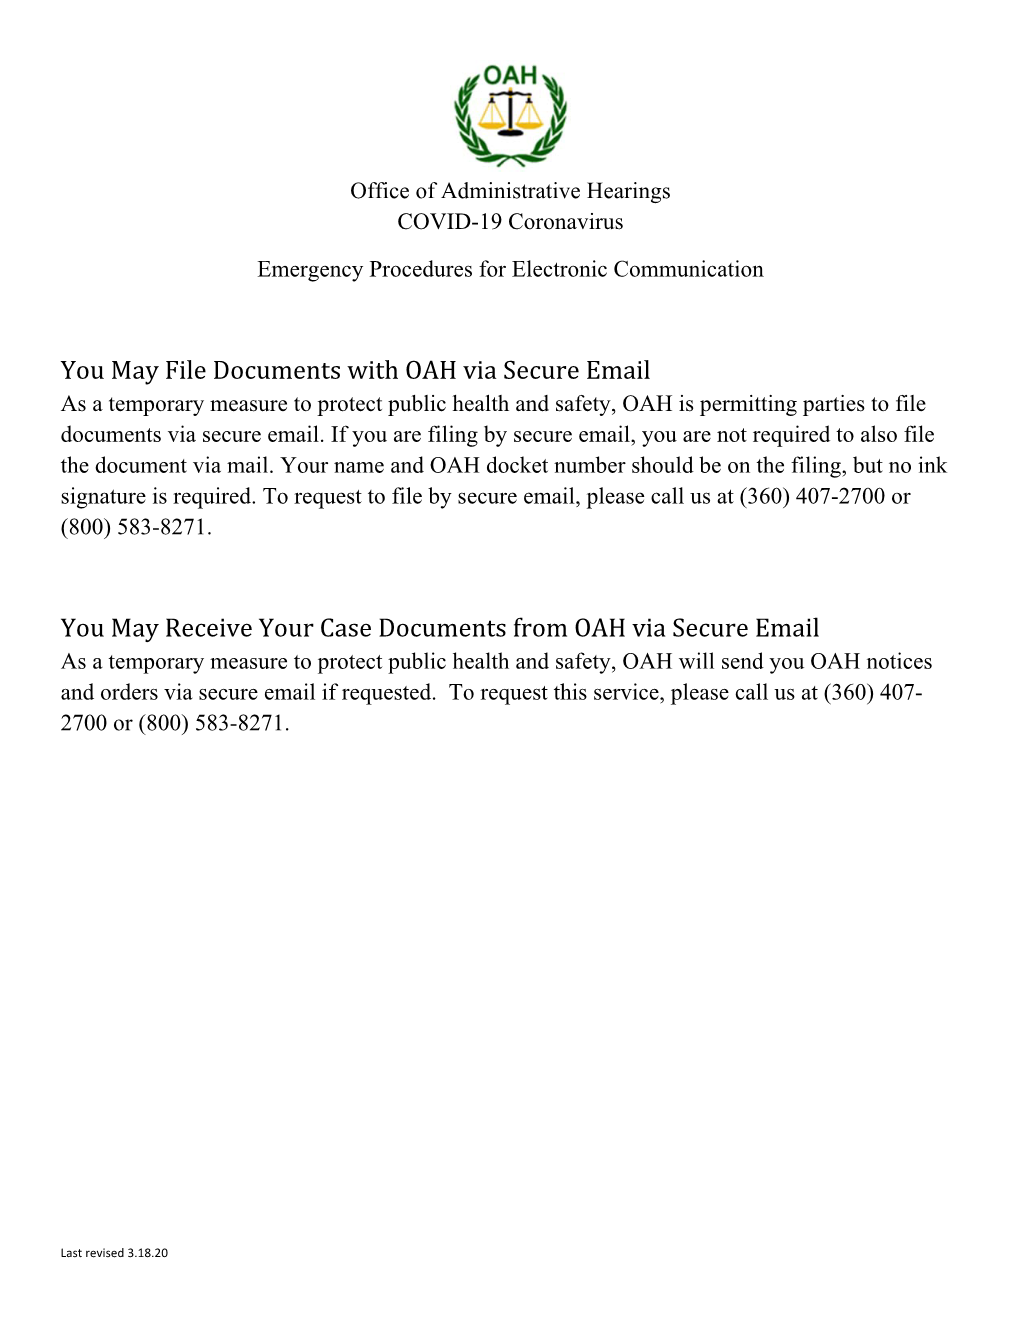 You May File Documents with OAH Via Secure Email